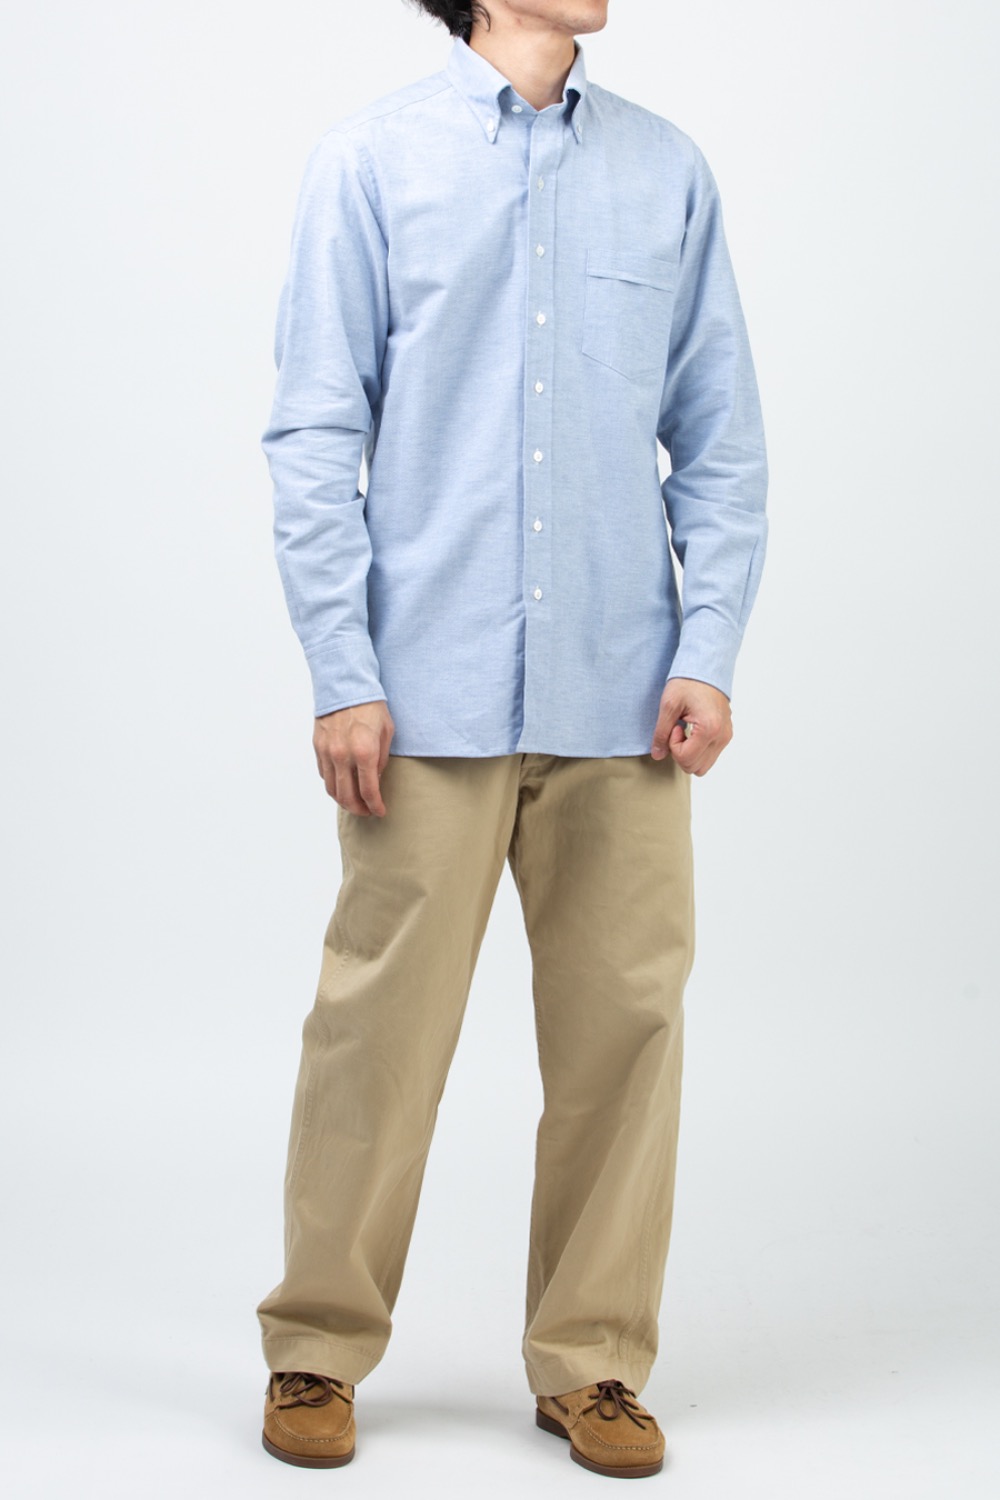 (CARRY OVER) MID-BLUE COTTON OXFORD CLOTH BUTTON-DOWN SHIRT